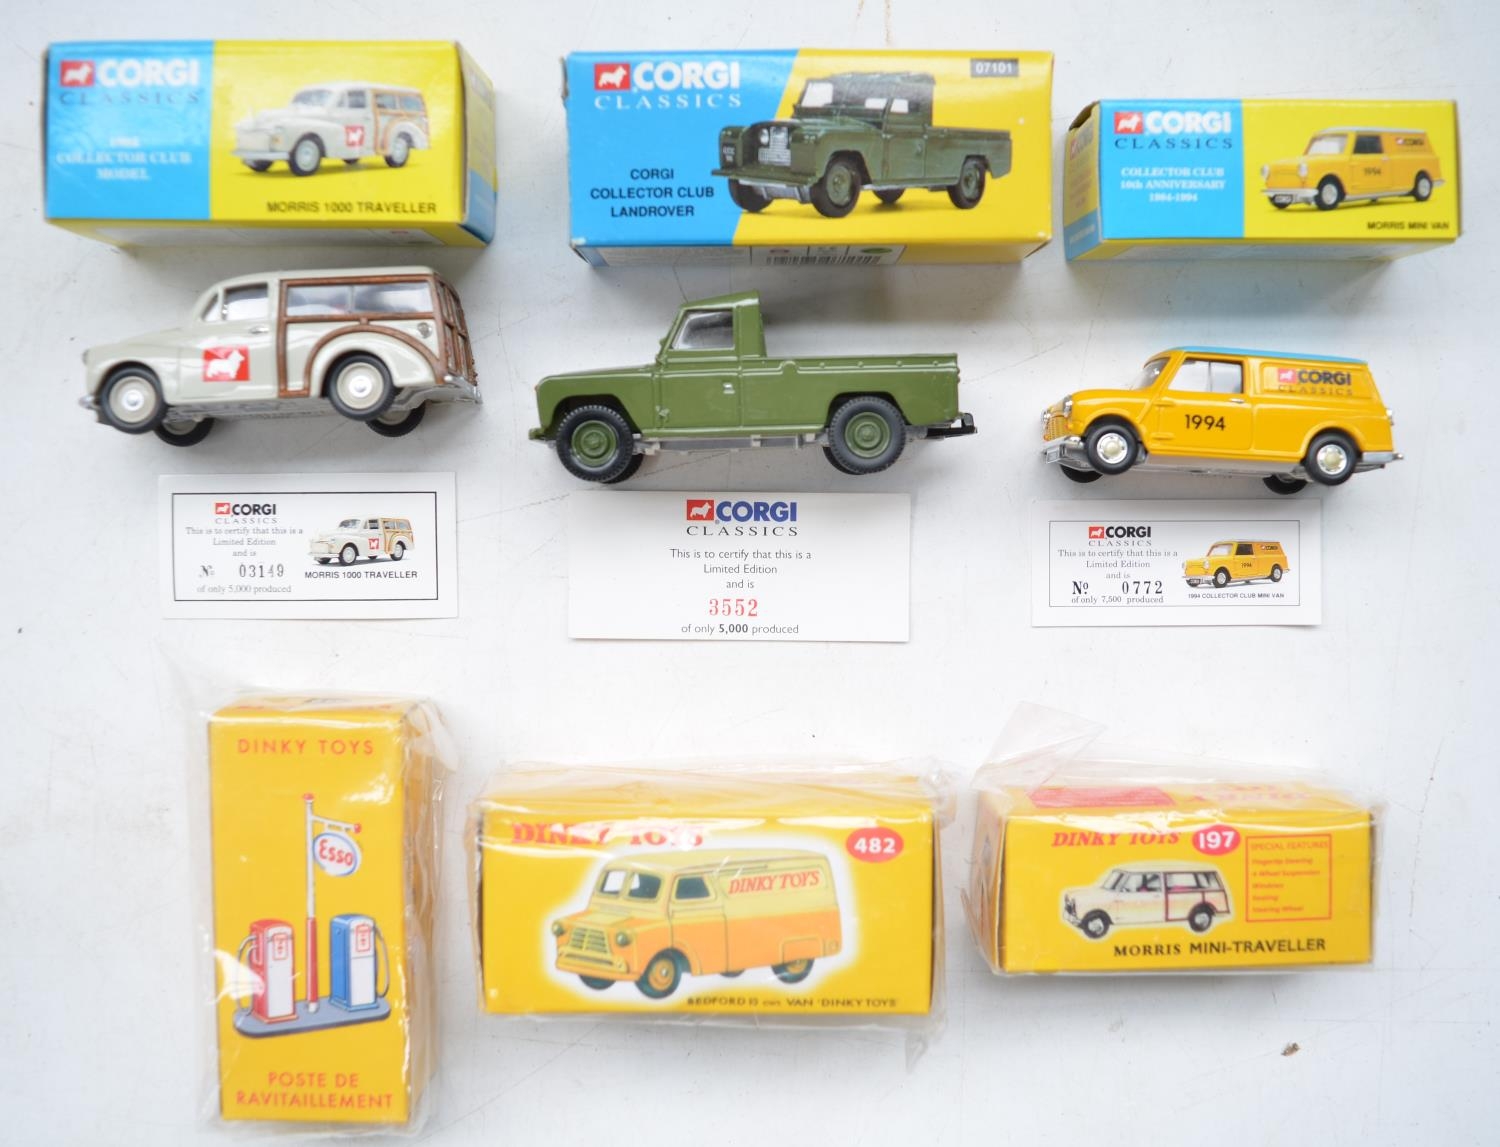 Collection of diecast model cars, various manufacturers and scales incl. Corgi, Maisto, Saico, - Image 7 of 7